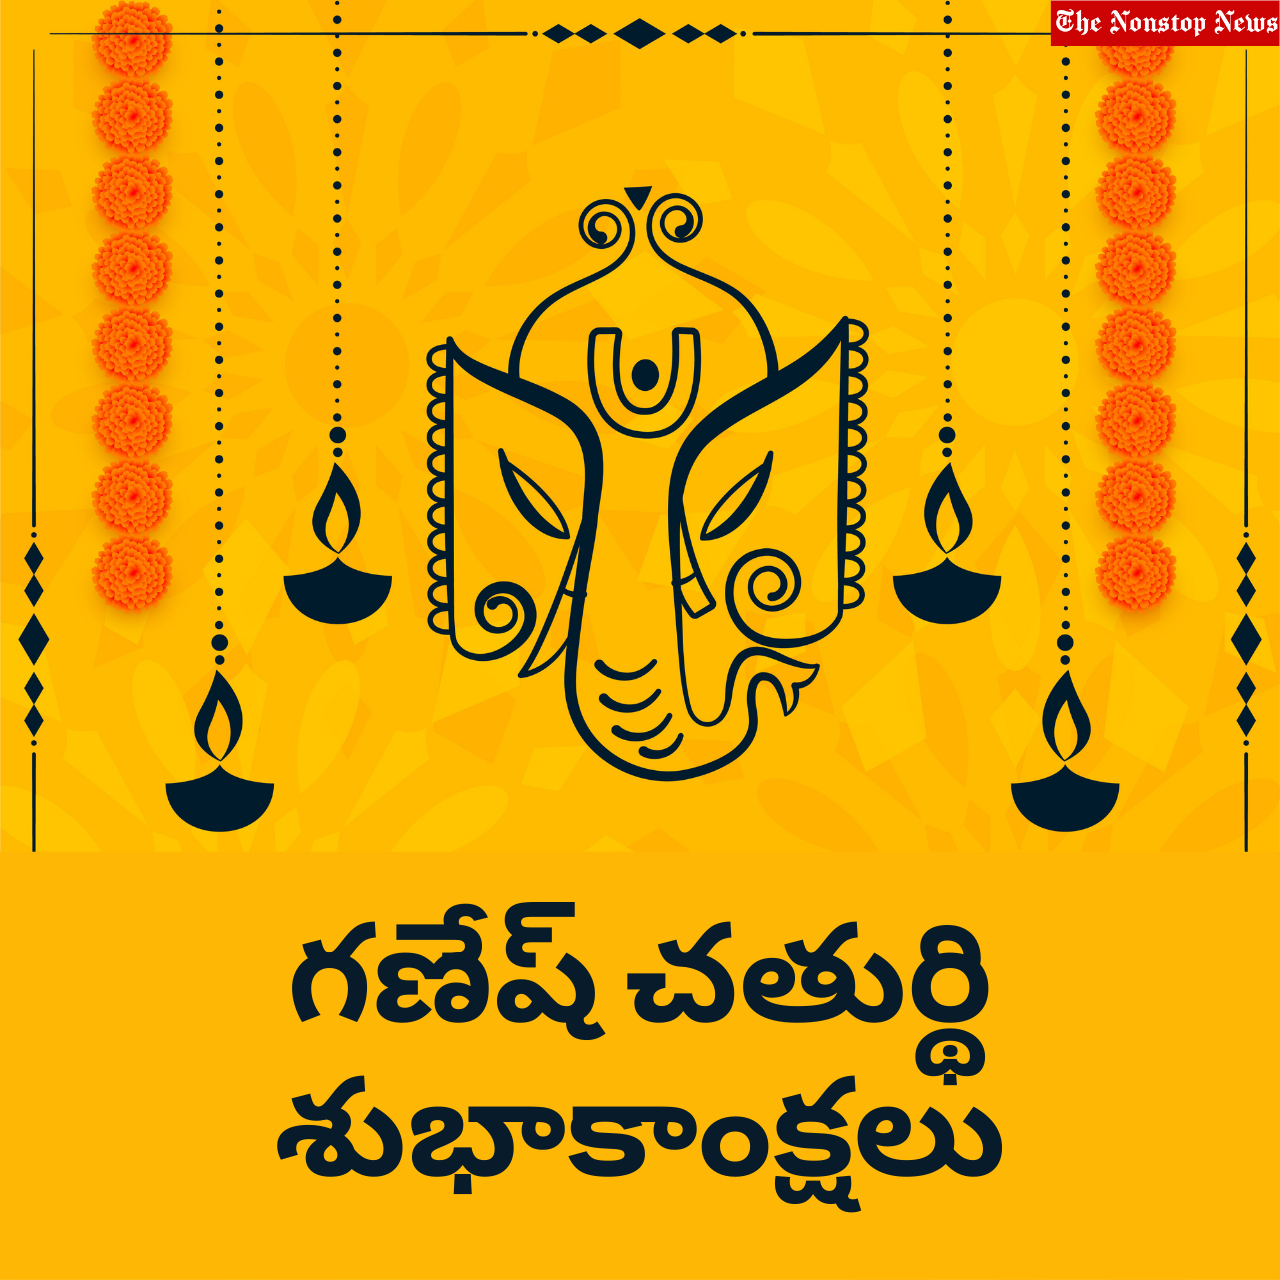 Ganesh Chaturthi 2021 Telugu Wishes, Quotes, HD Images, Messages, Greetings, and Status to Share to anyone